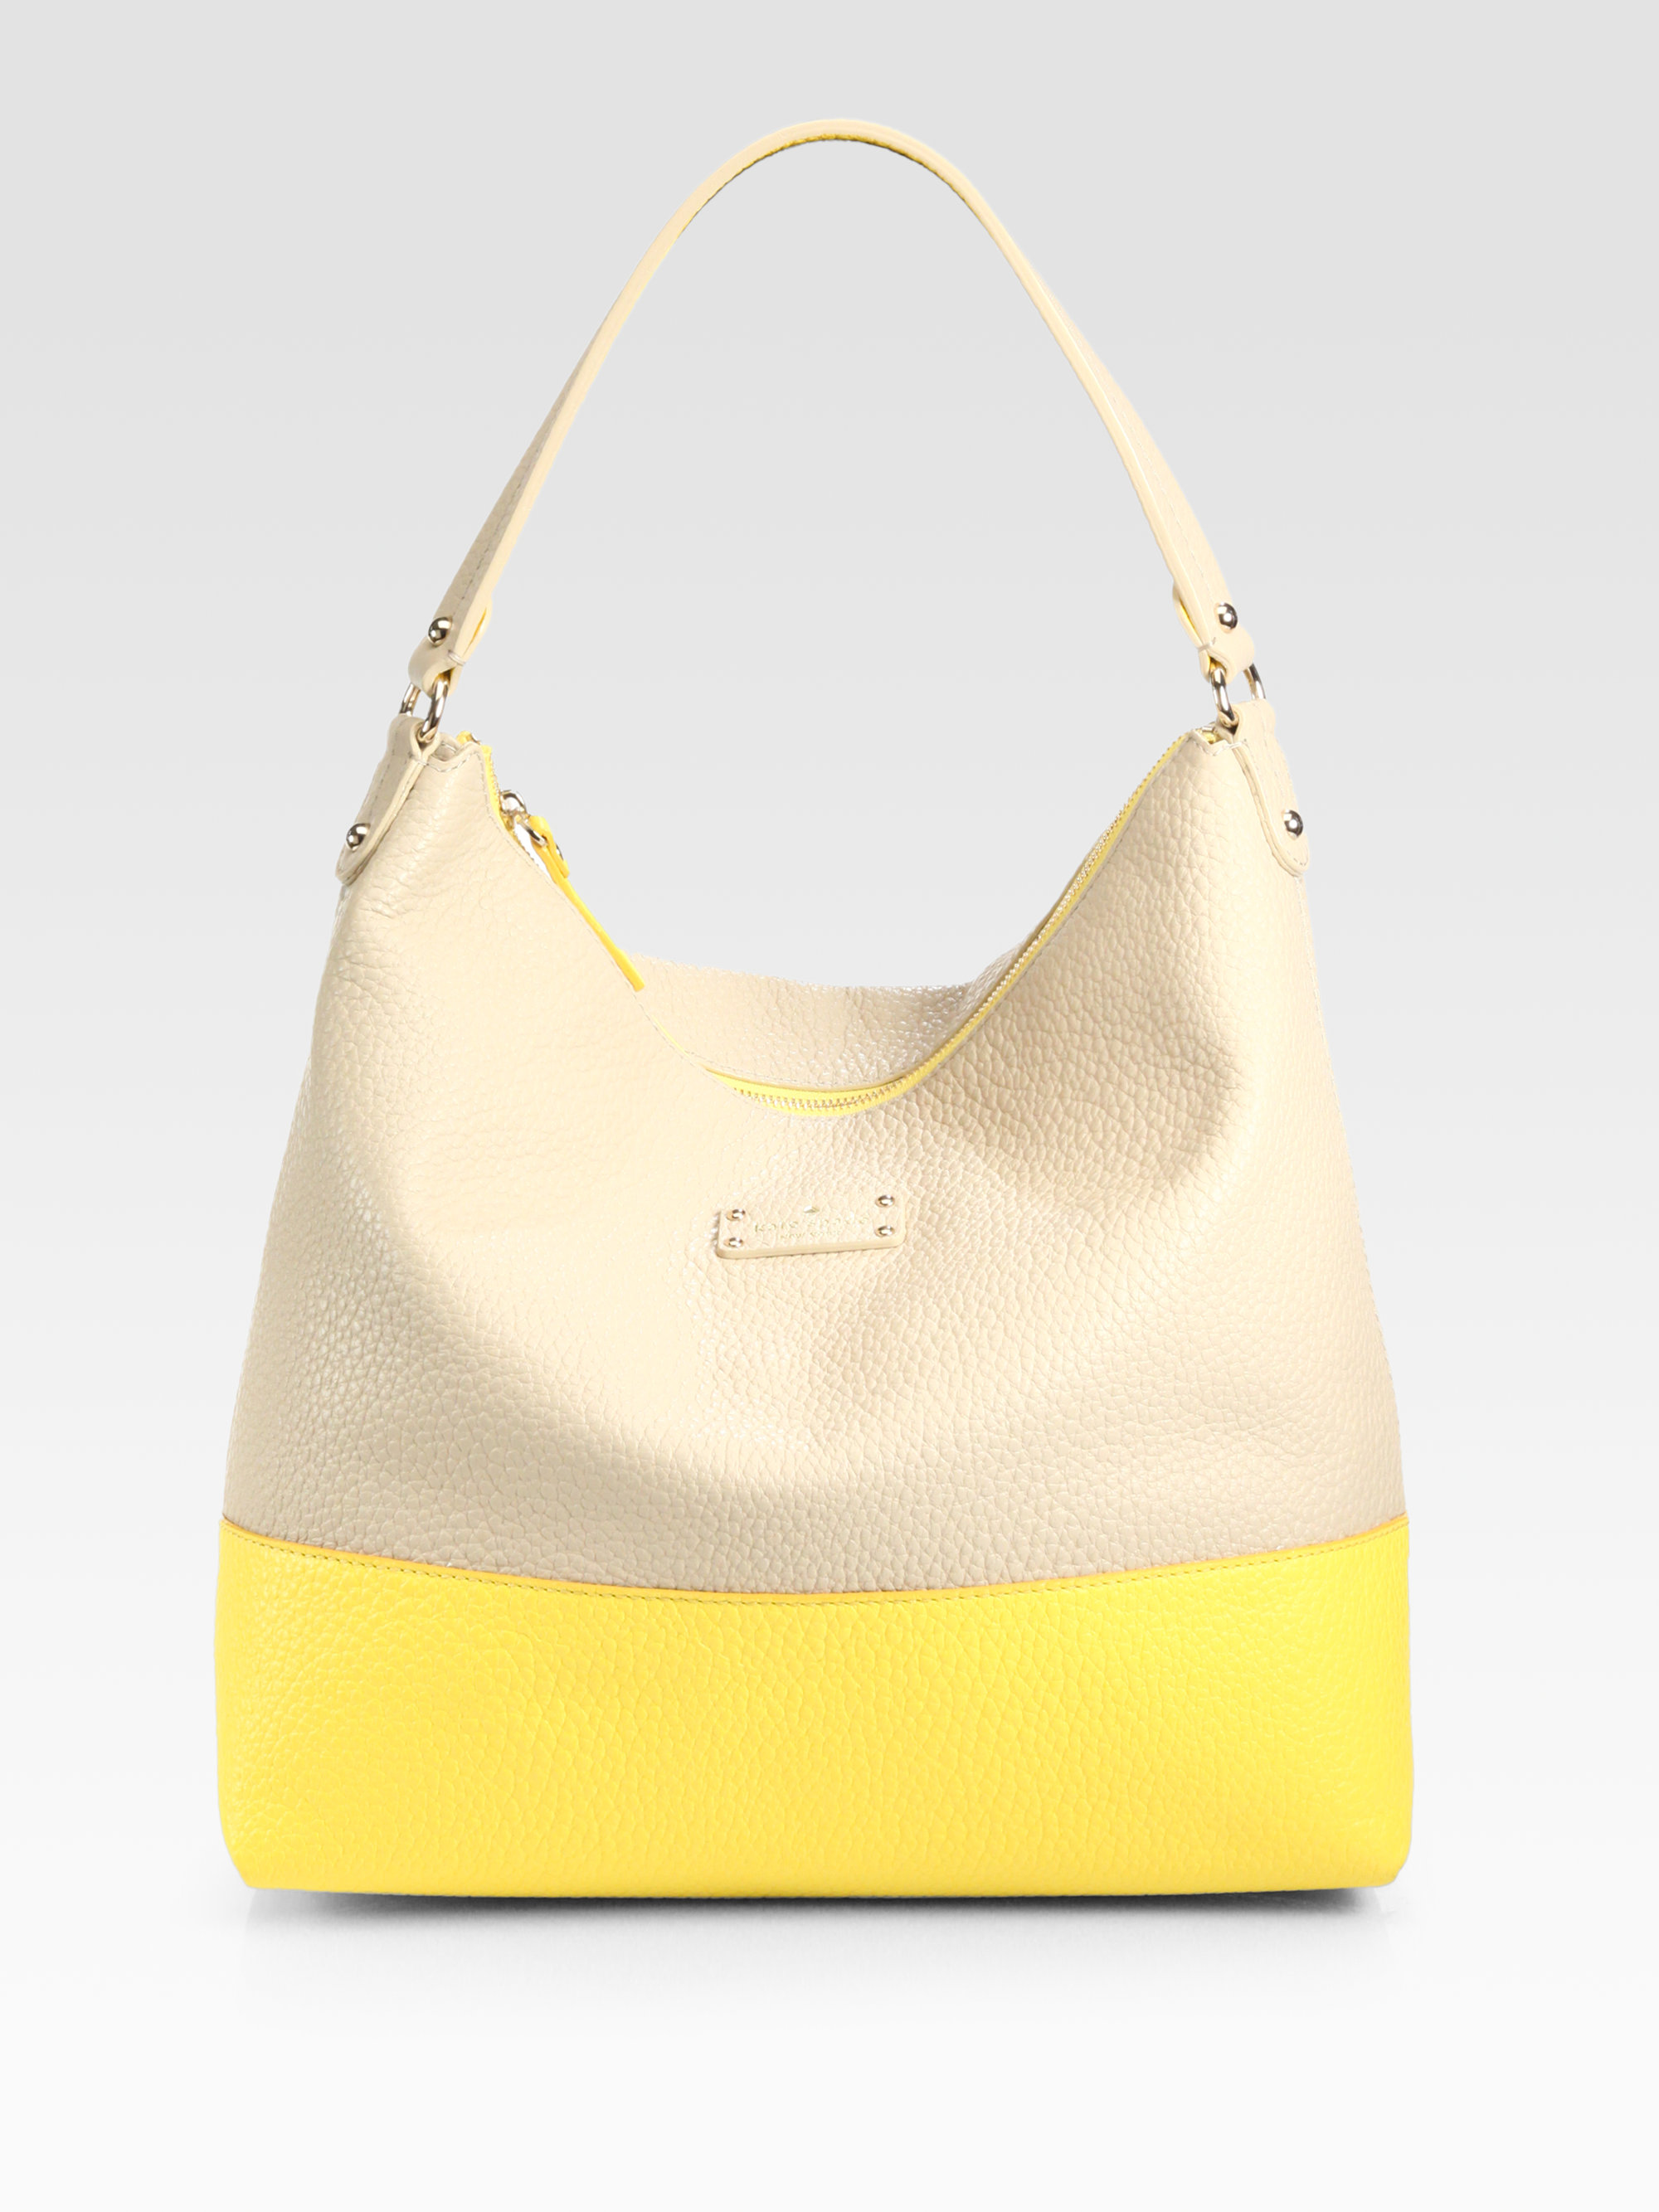 Kate Spade Grayson Hobo Shoulder Bag in Yellow (yellow-beige) | Lyst